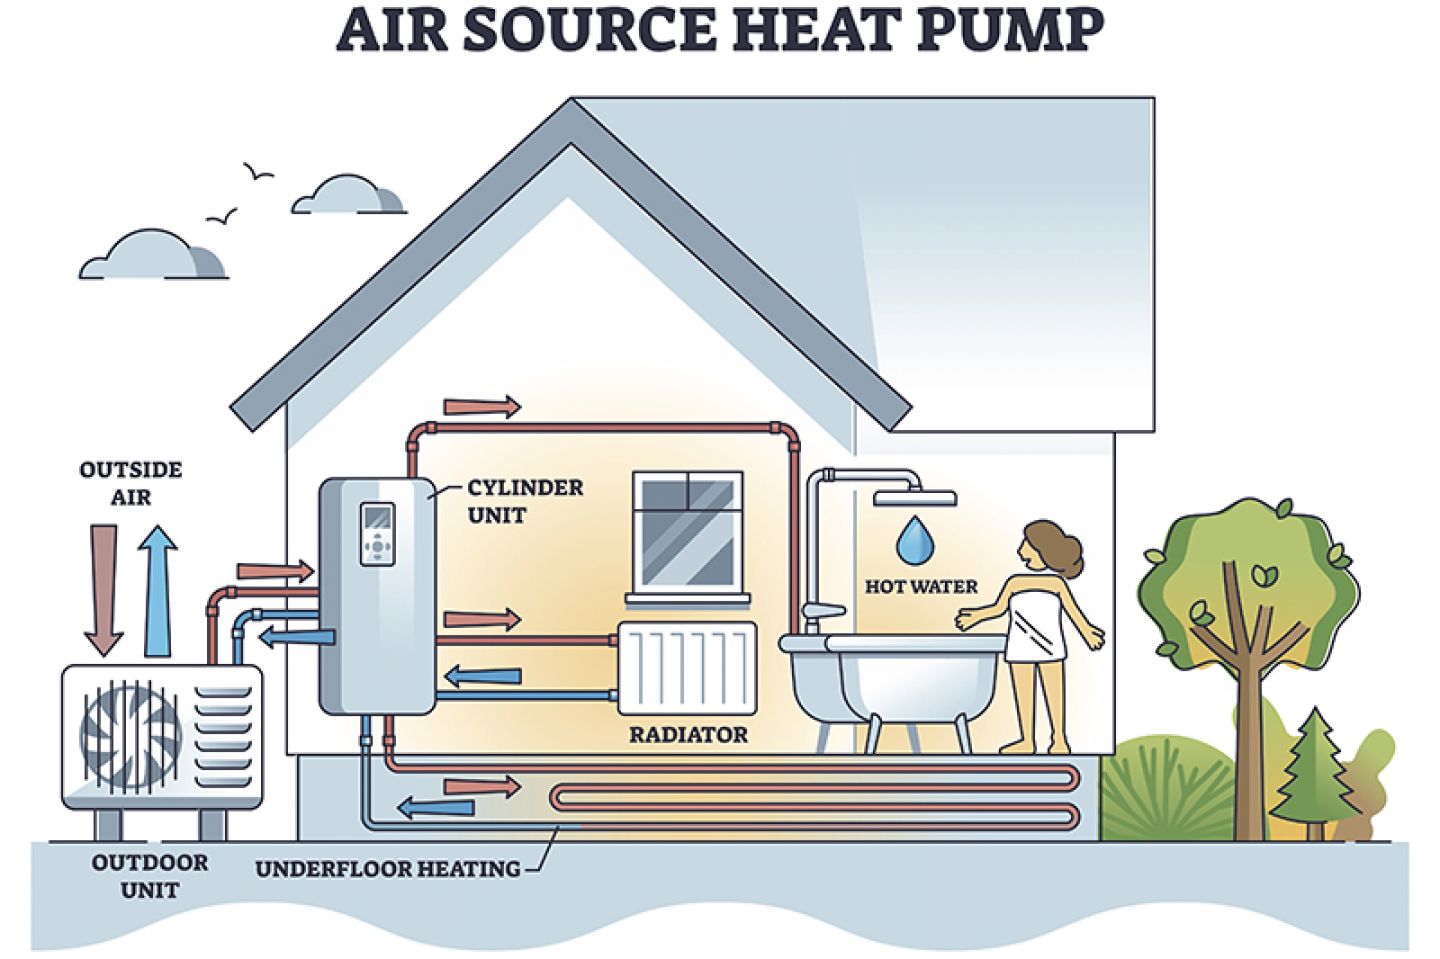 Diagram of air source heat pump linked into home.